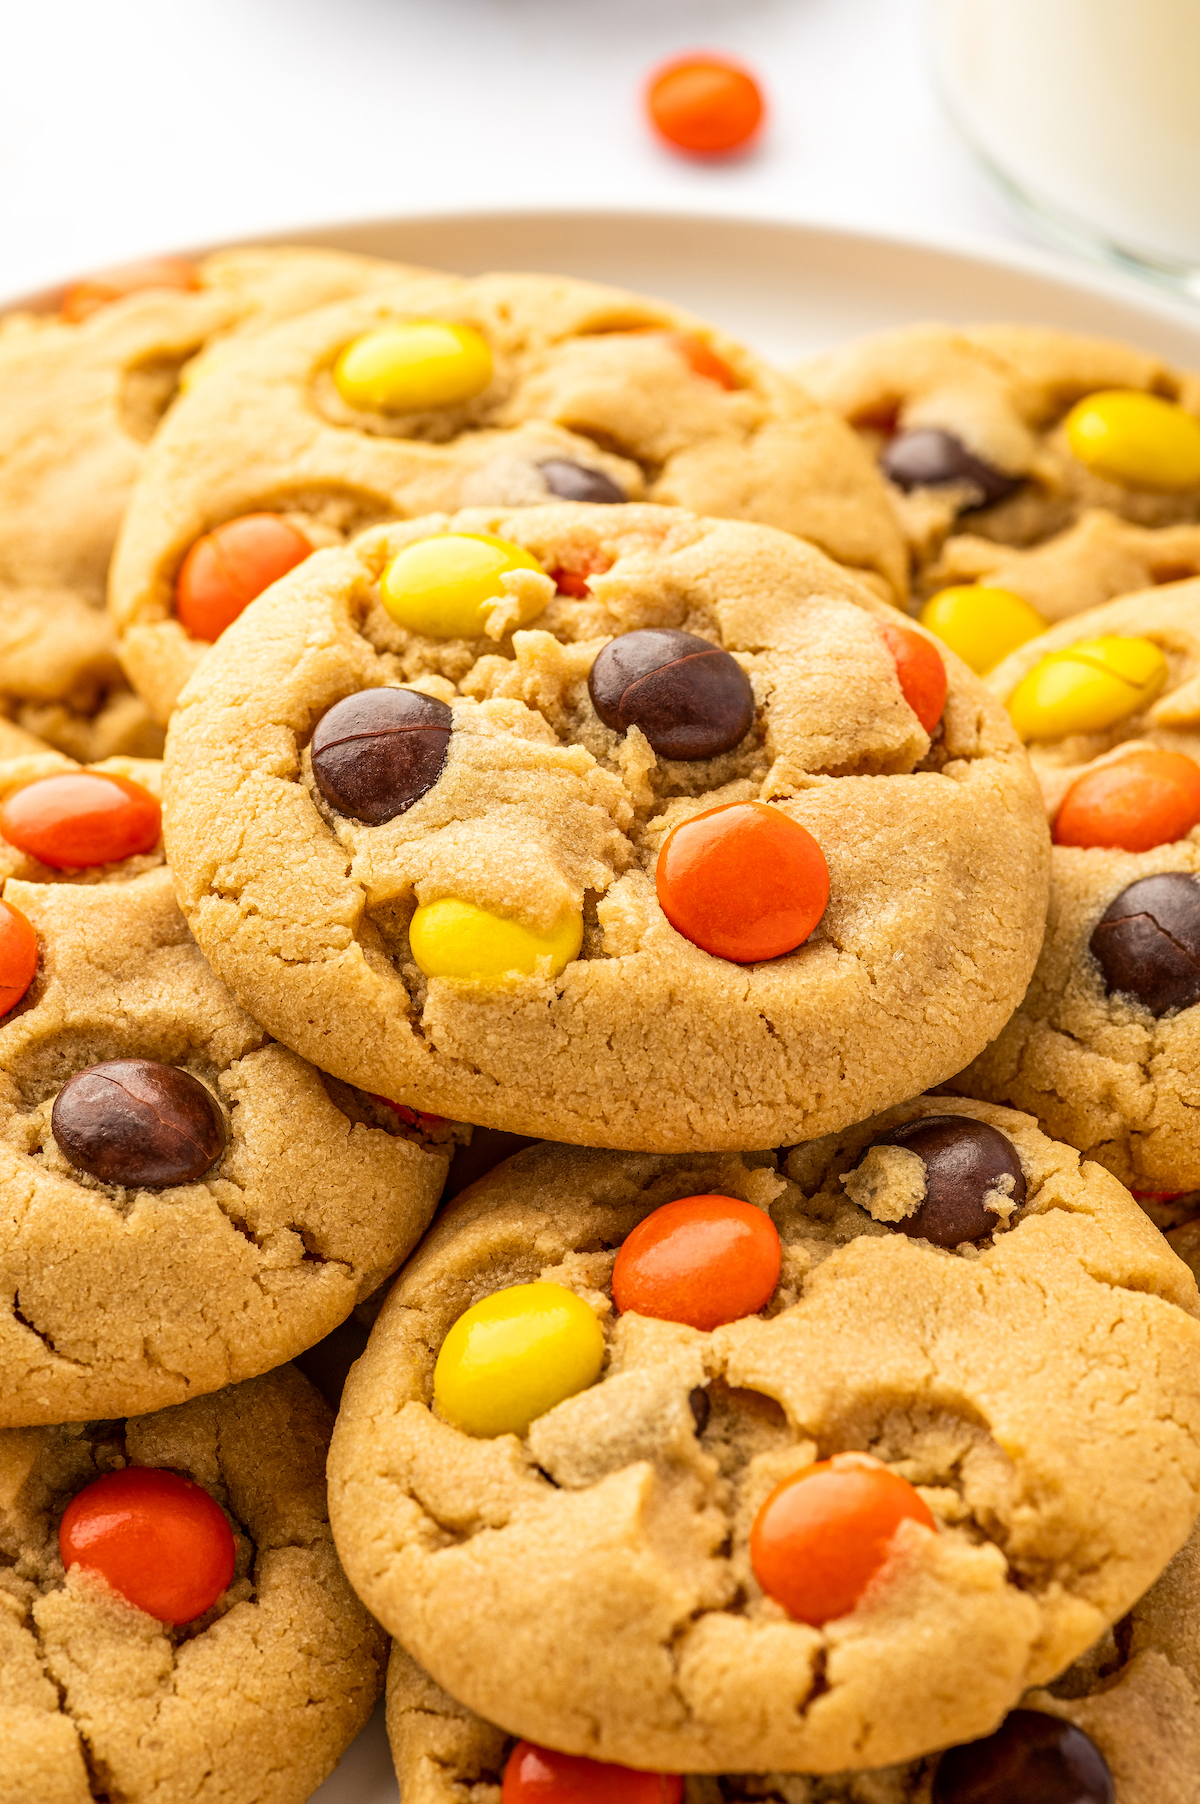 Homemade peanut butter cookies with candies.